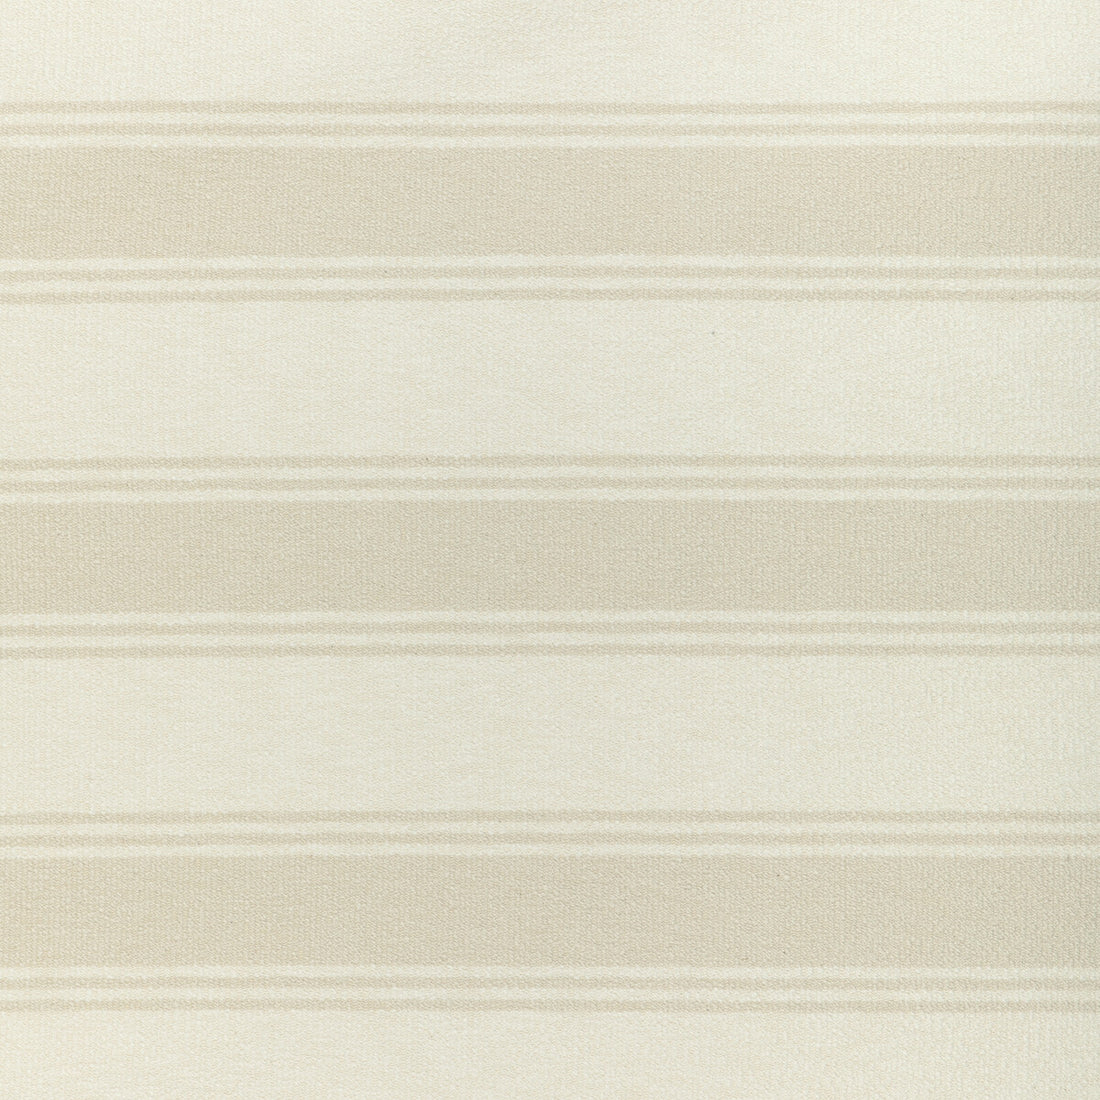 Ona Stripe fabric in oyster color - pattern 36905.116.0 - by Kravet Couture in the Atelier Weaves collection